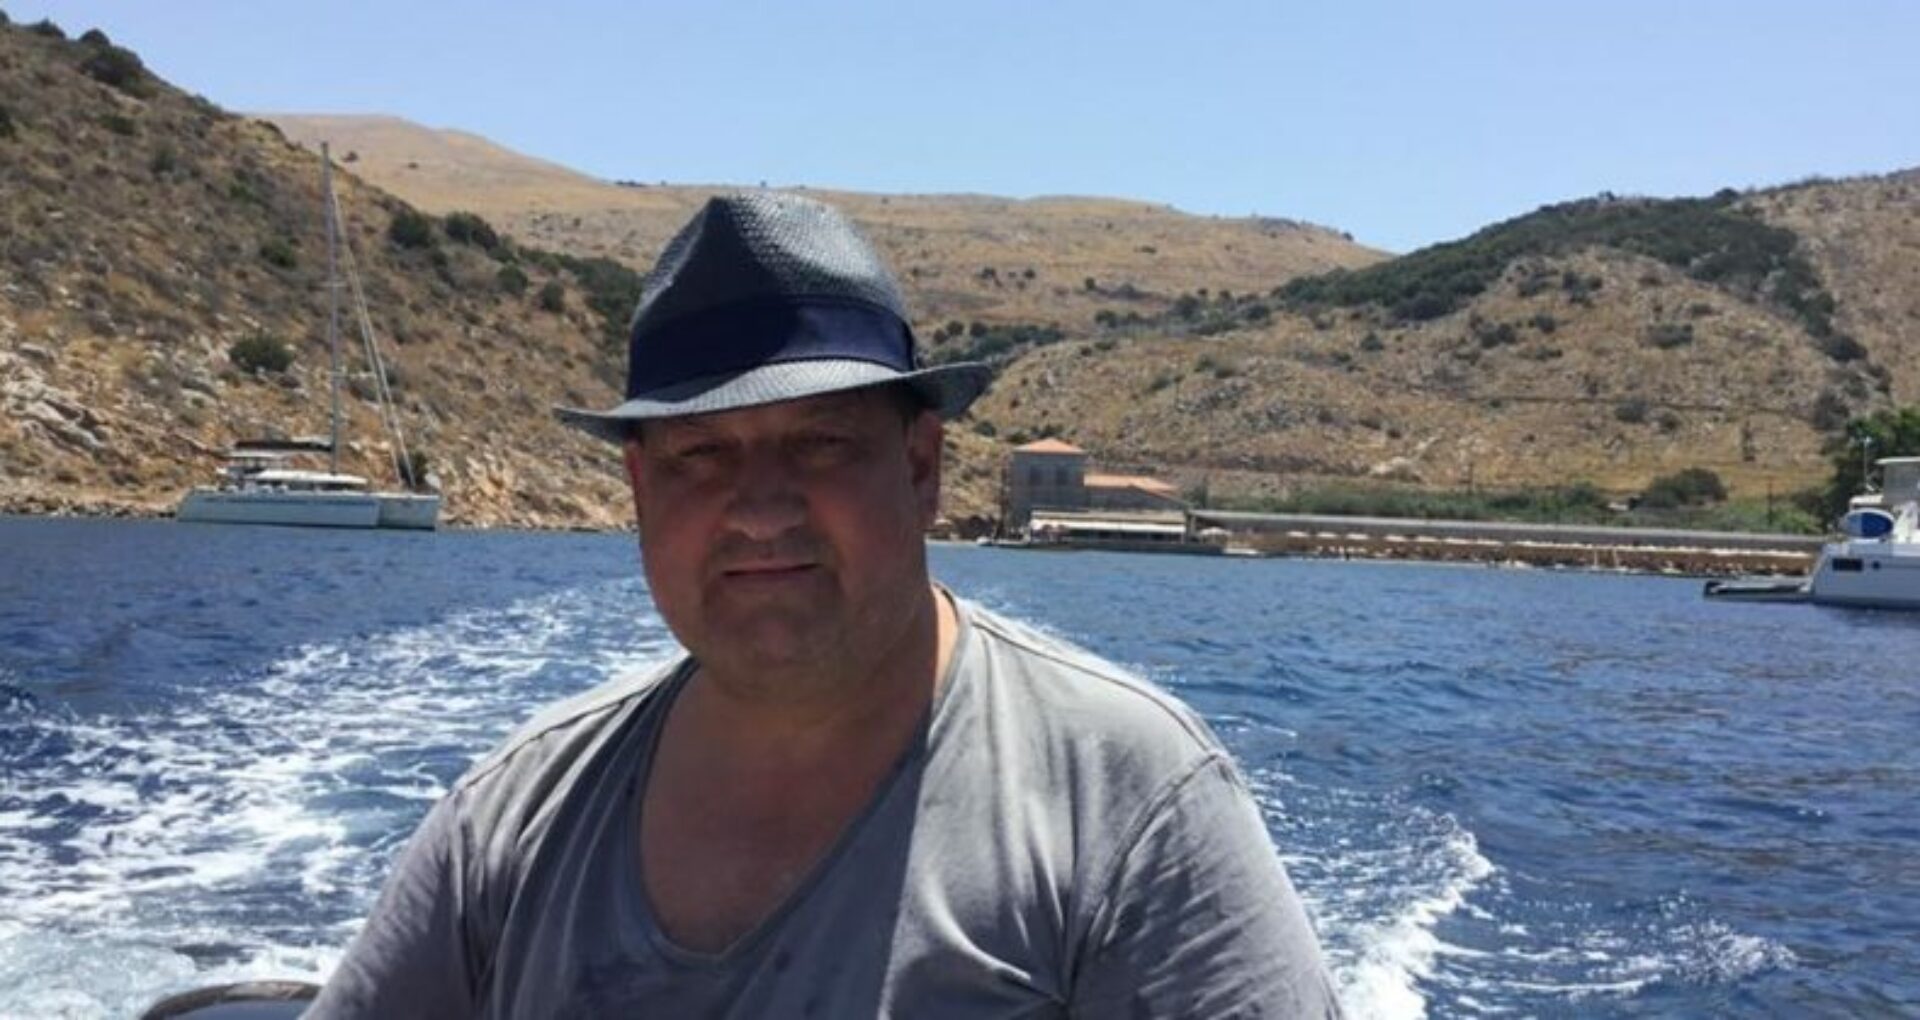 Former Minister Iurie Chirinciuc, Sentenced to Imprisonment and Sought by the Police, Posts Pictures from a Holiday at Sea